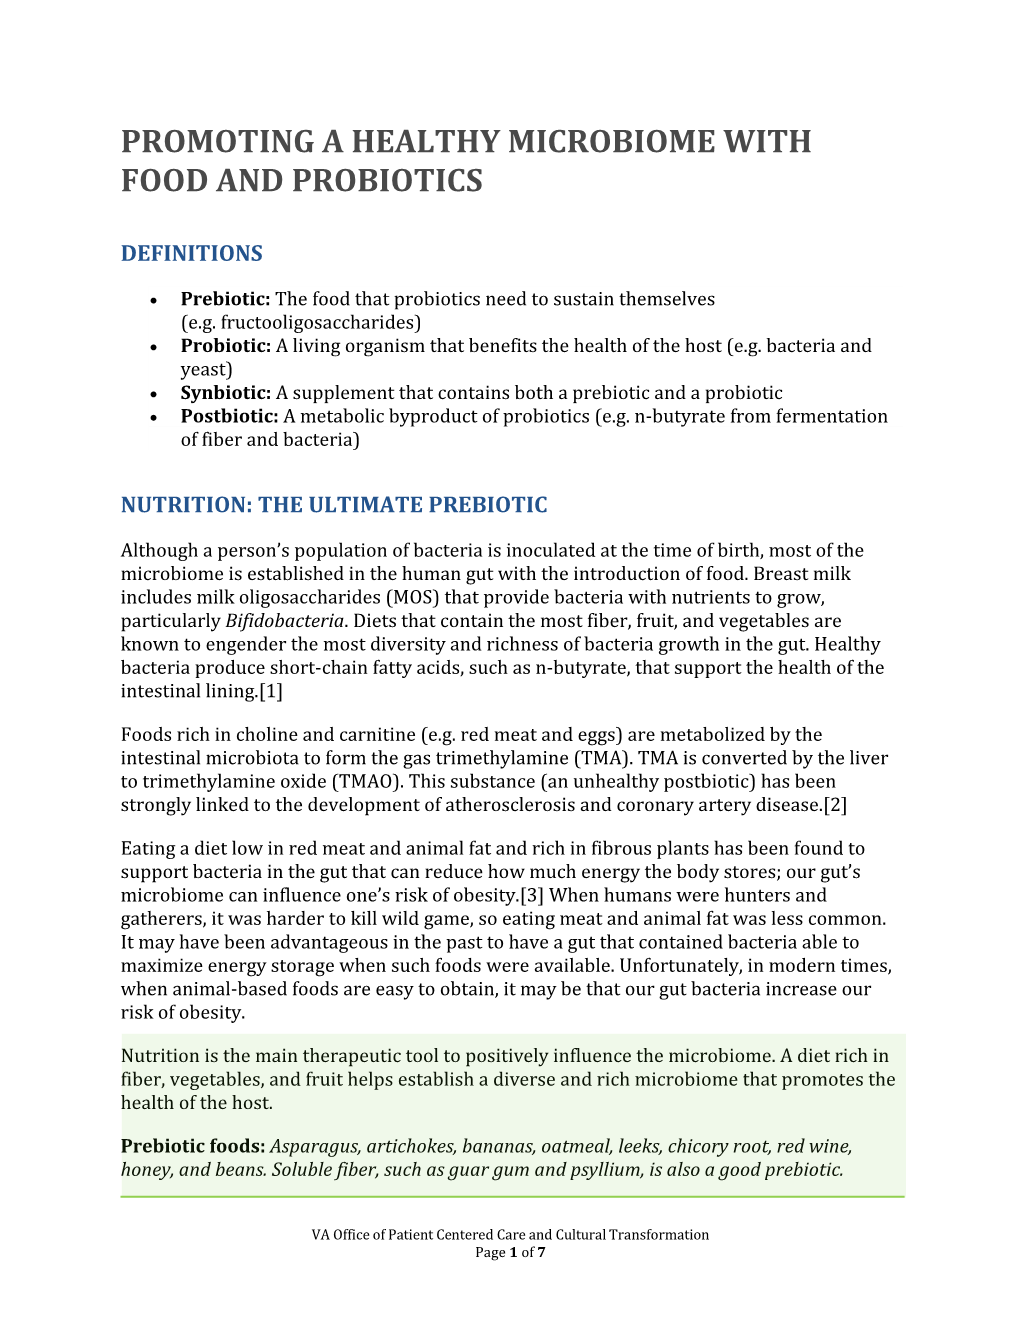 Promoting a Healthy Microbiome with Food and Probiotics